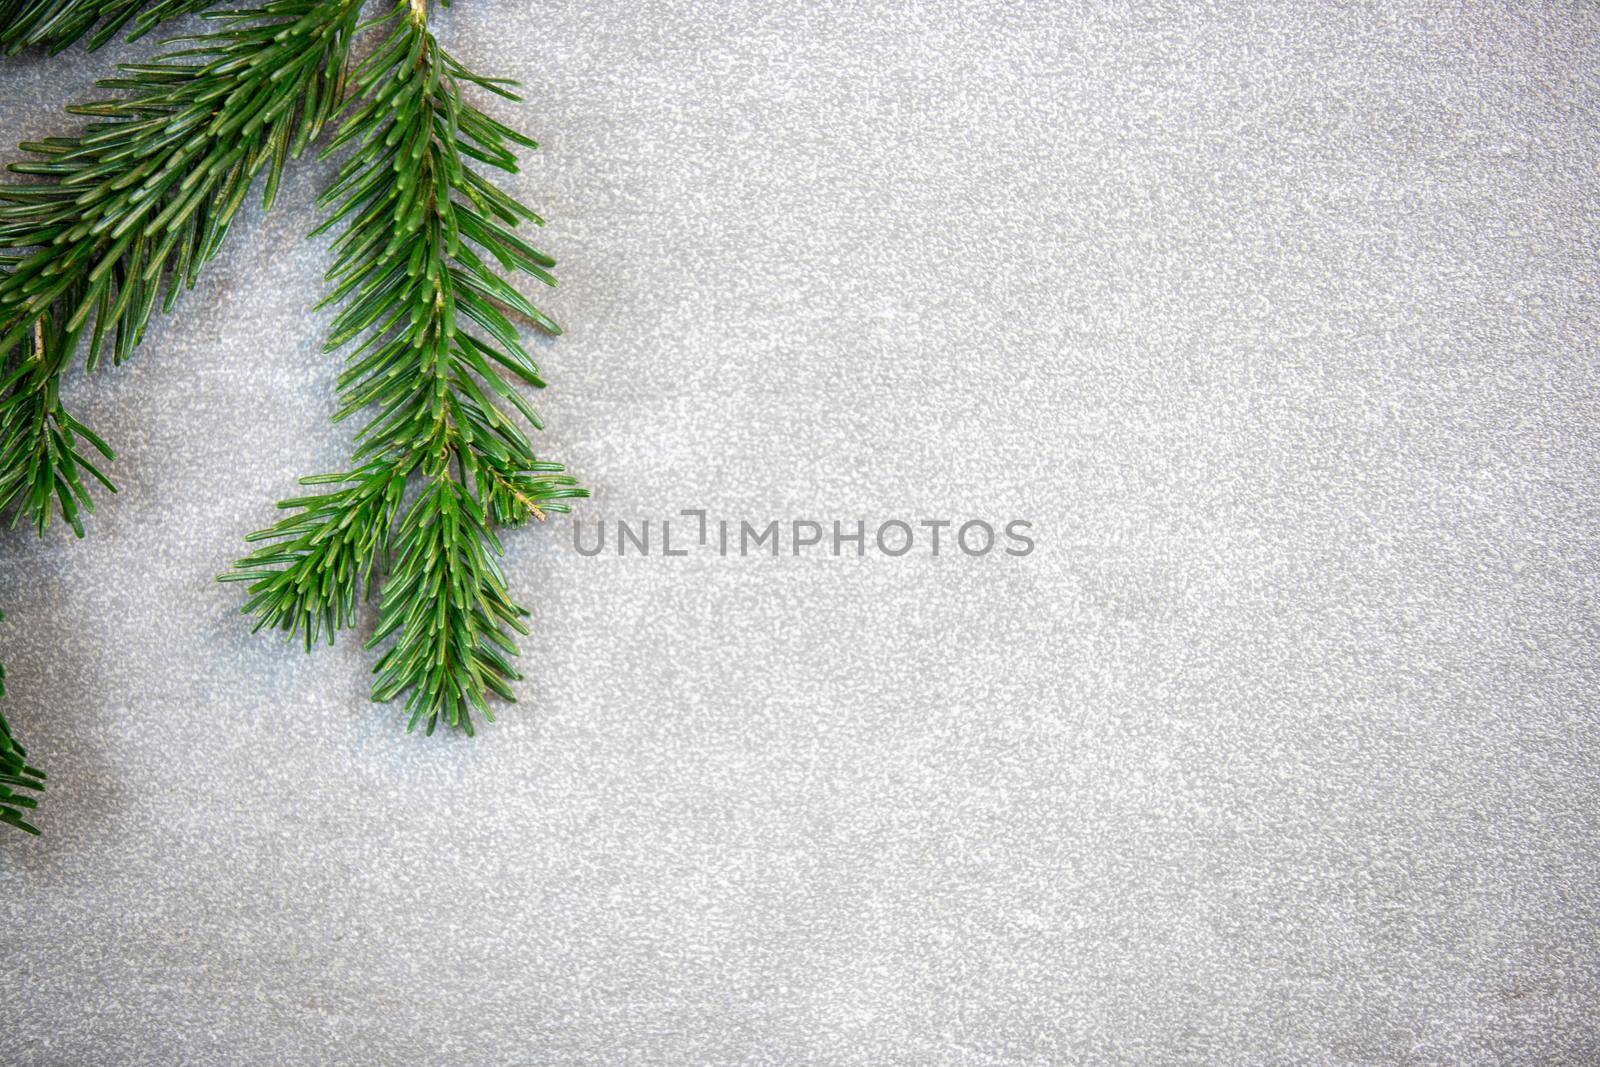 Christmas motif, texture, background with branches of a Nordmann fir left at the top on a dark grey marbled  background with free space for text. by reinerc